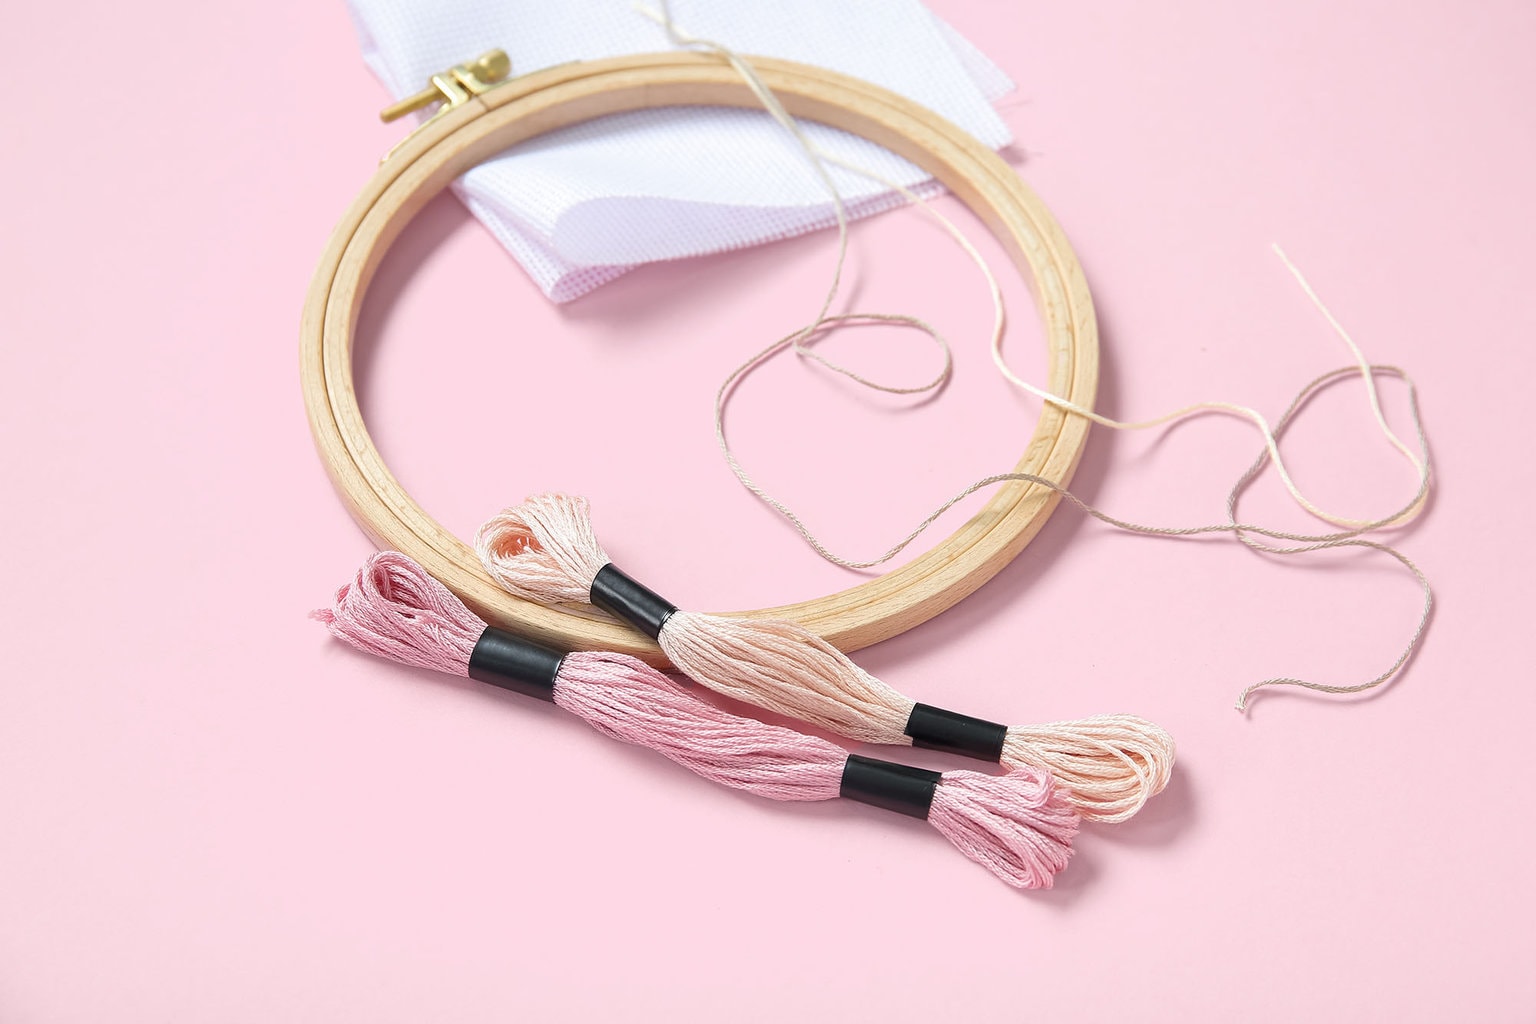 An empty embroidery hoop sits on a pastel pink background next to two shades of pink embroidery floss and white fabric